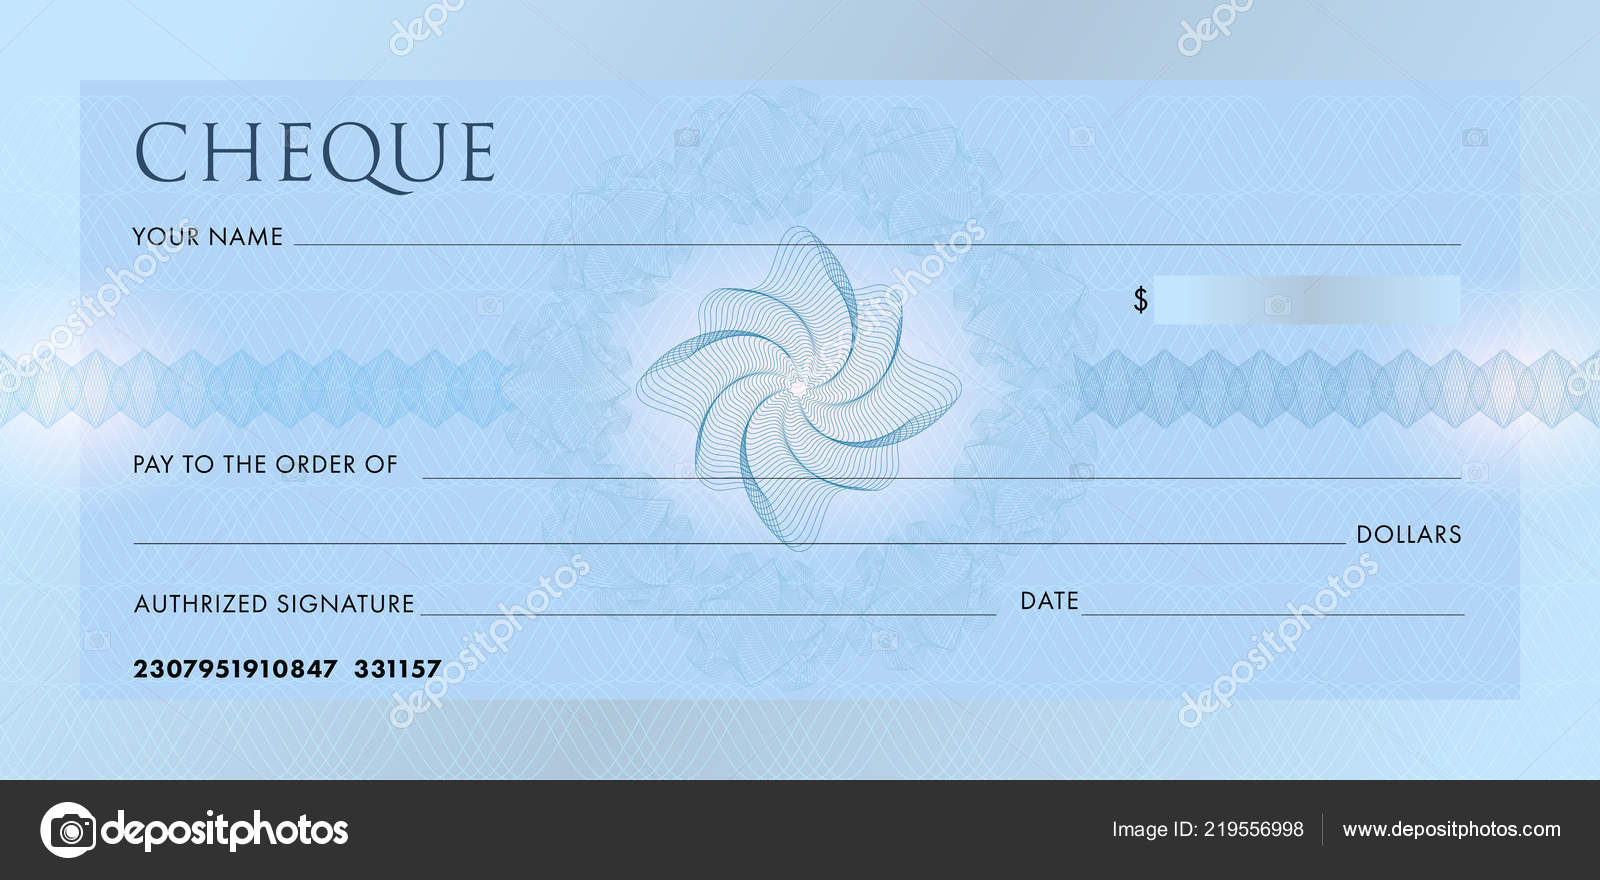 Check Template Chequebook Template Blank Blue Business Bank Cheque Intended For Blank Cheque Template Uk